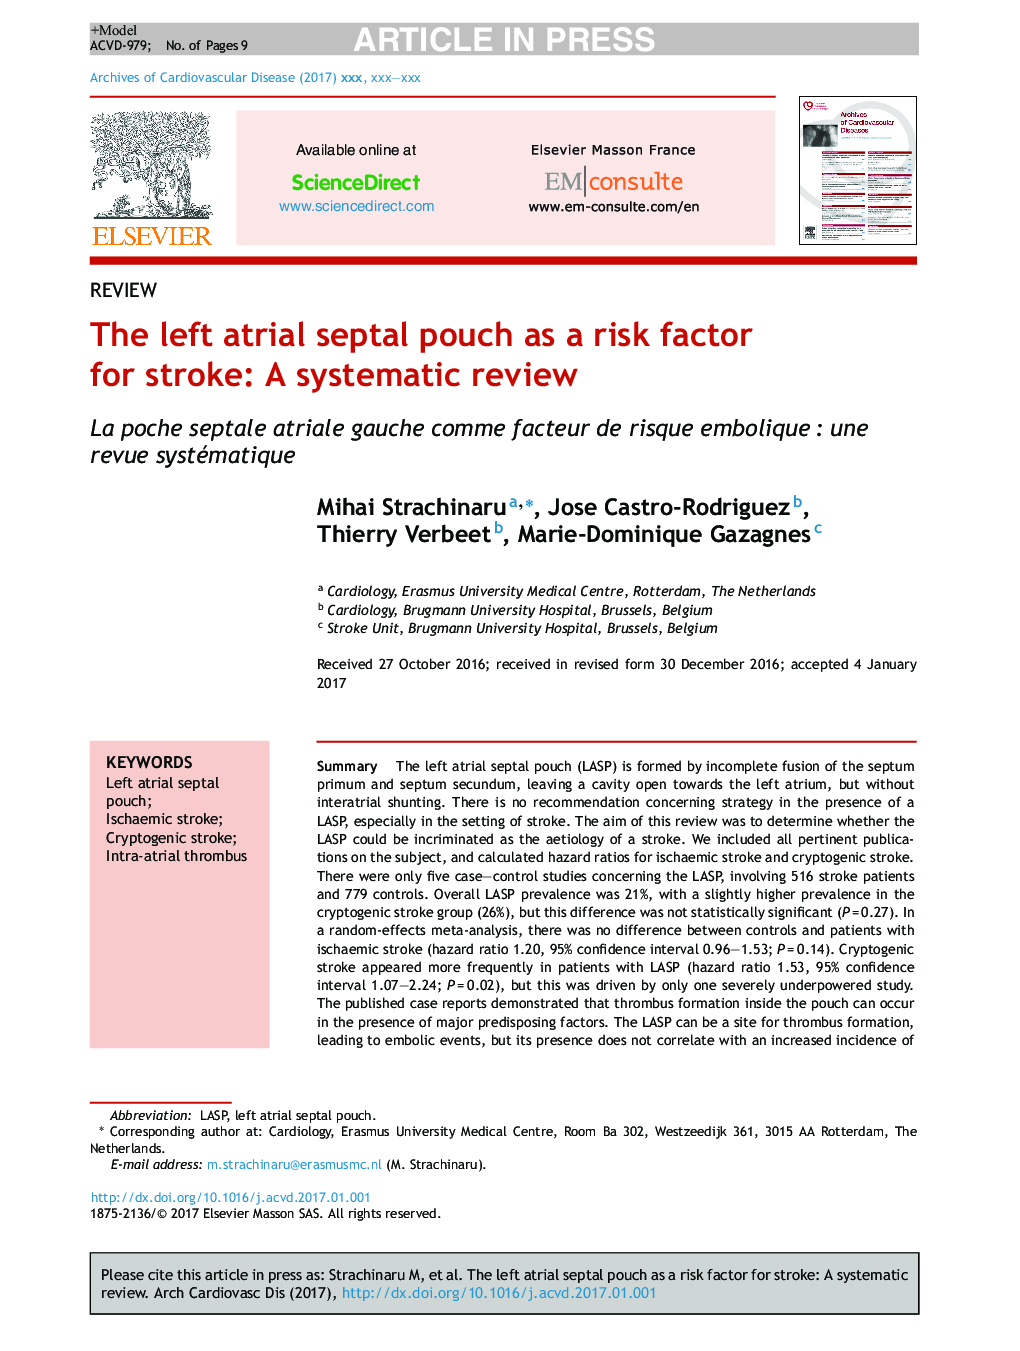 The left atrial septal pouch as a risk factor for stroke: A systematic review